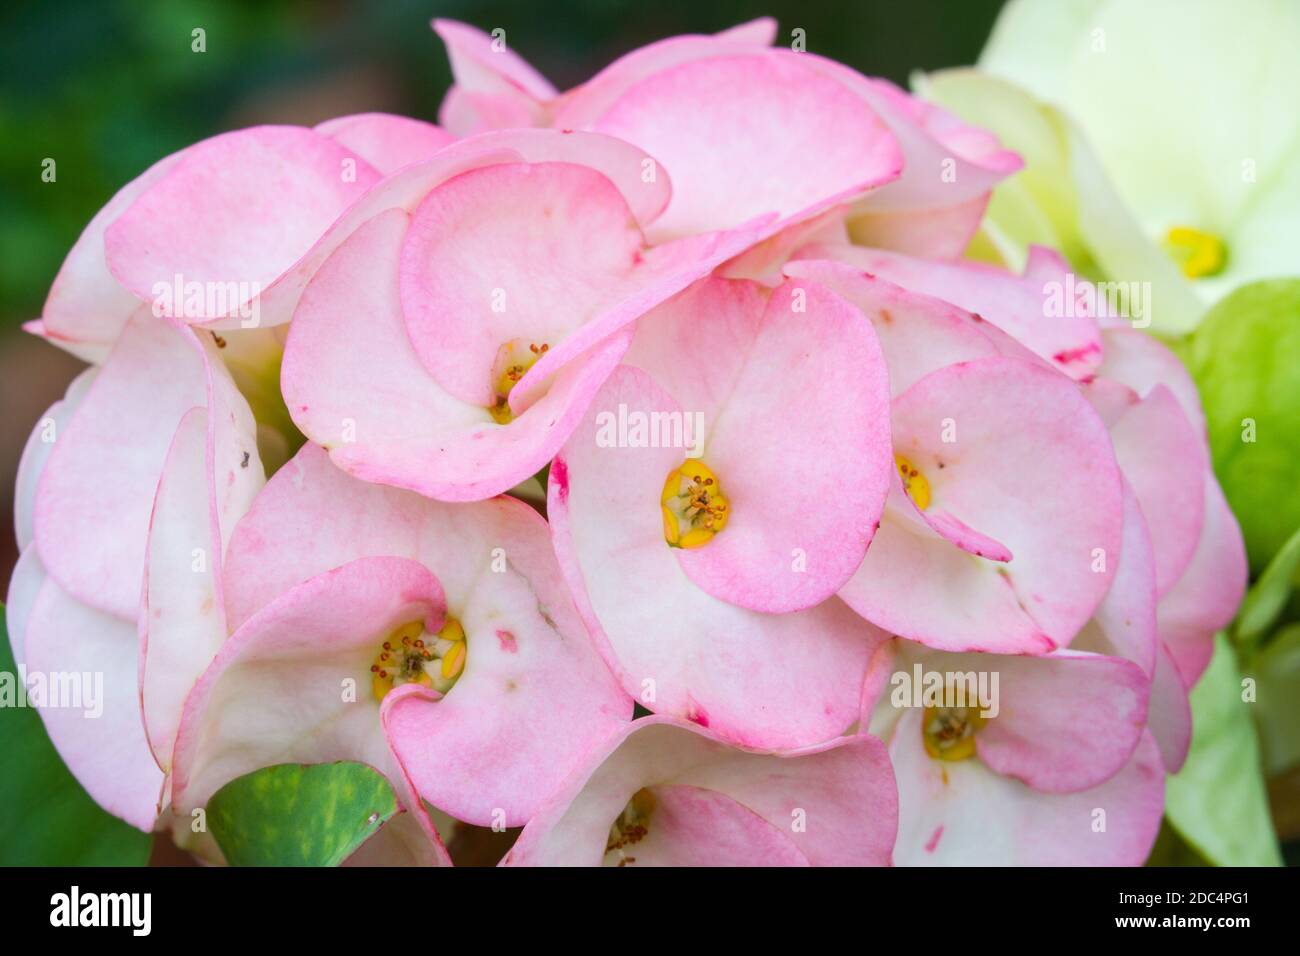 pink Euphorbia milii or crown of thorns is a species of flowering plant. Stock Photo